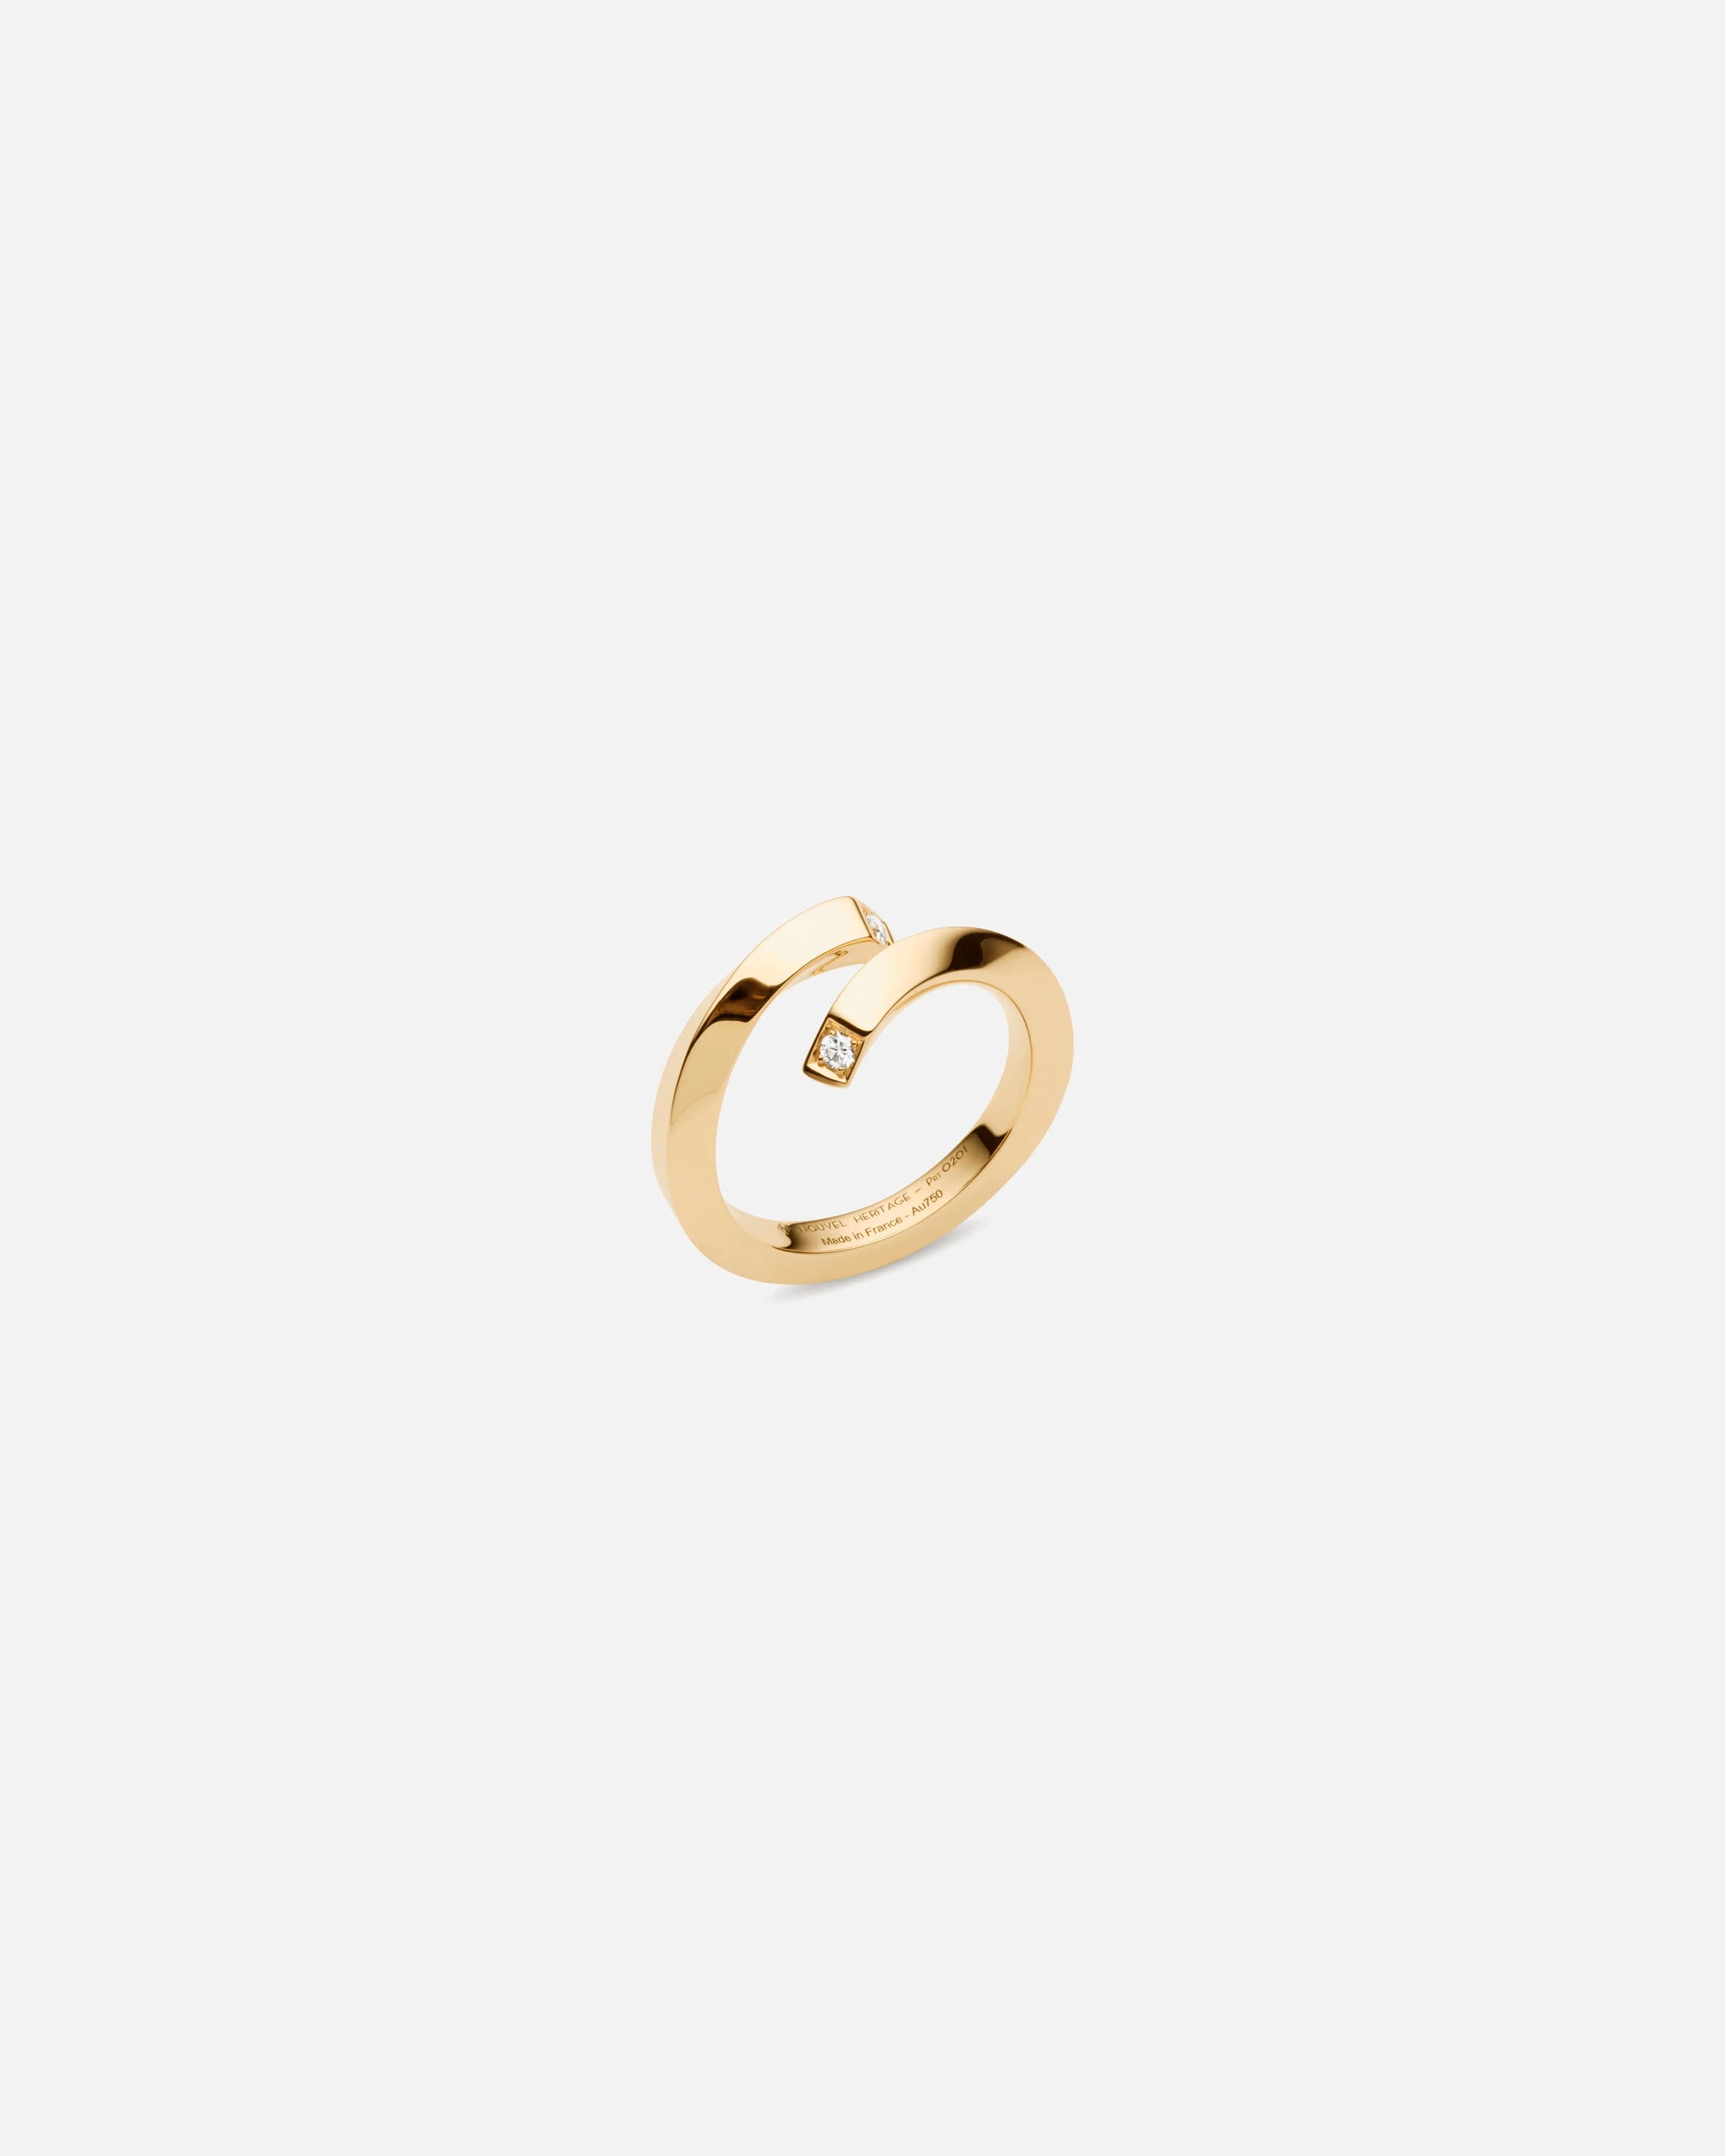 Yellow Gold Thread Ring - 1 - Nouvel Heritage